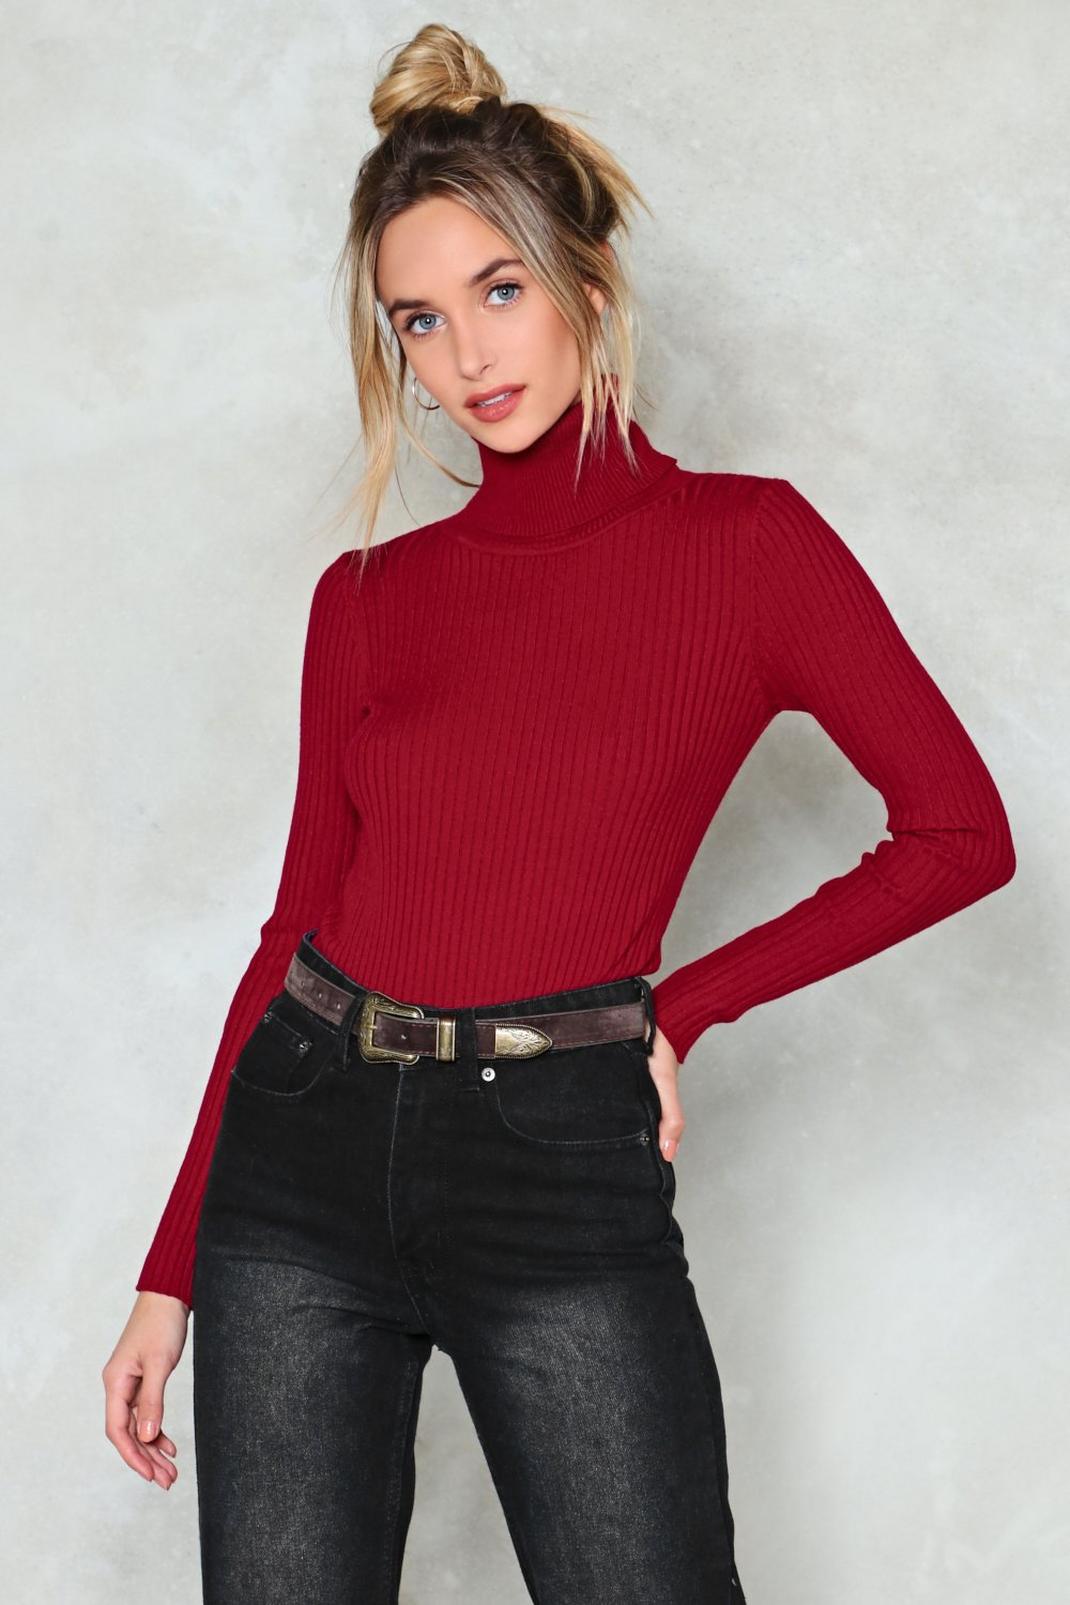 My Neck of the Woods Turtleneck Sweater | Nasty Gal